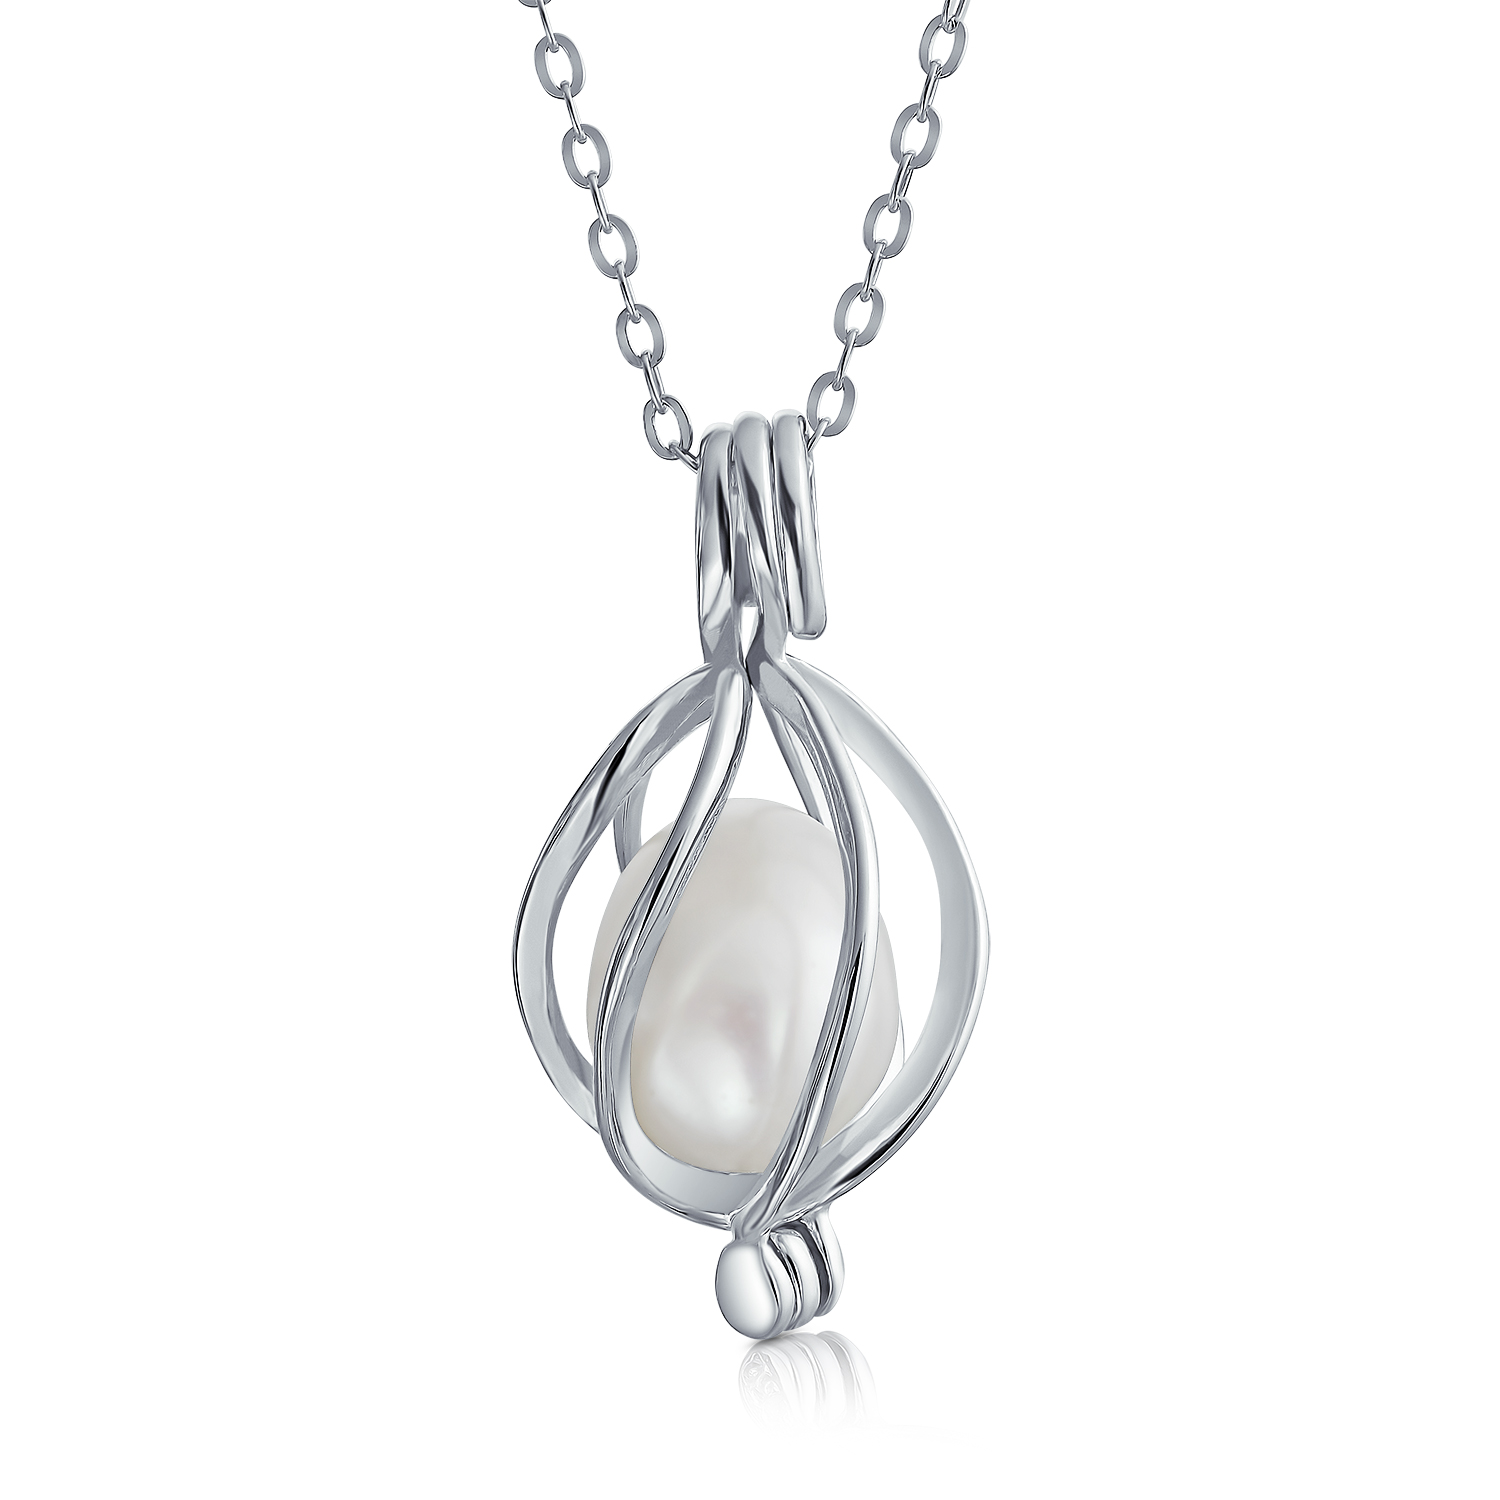 Bling Jewelry Drop Pendant White Freshwater Cultured Pearl Caged Sterling Silver 18" - image 1 of 4